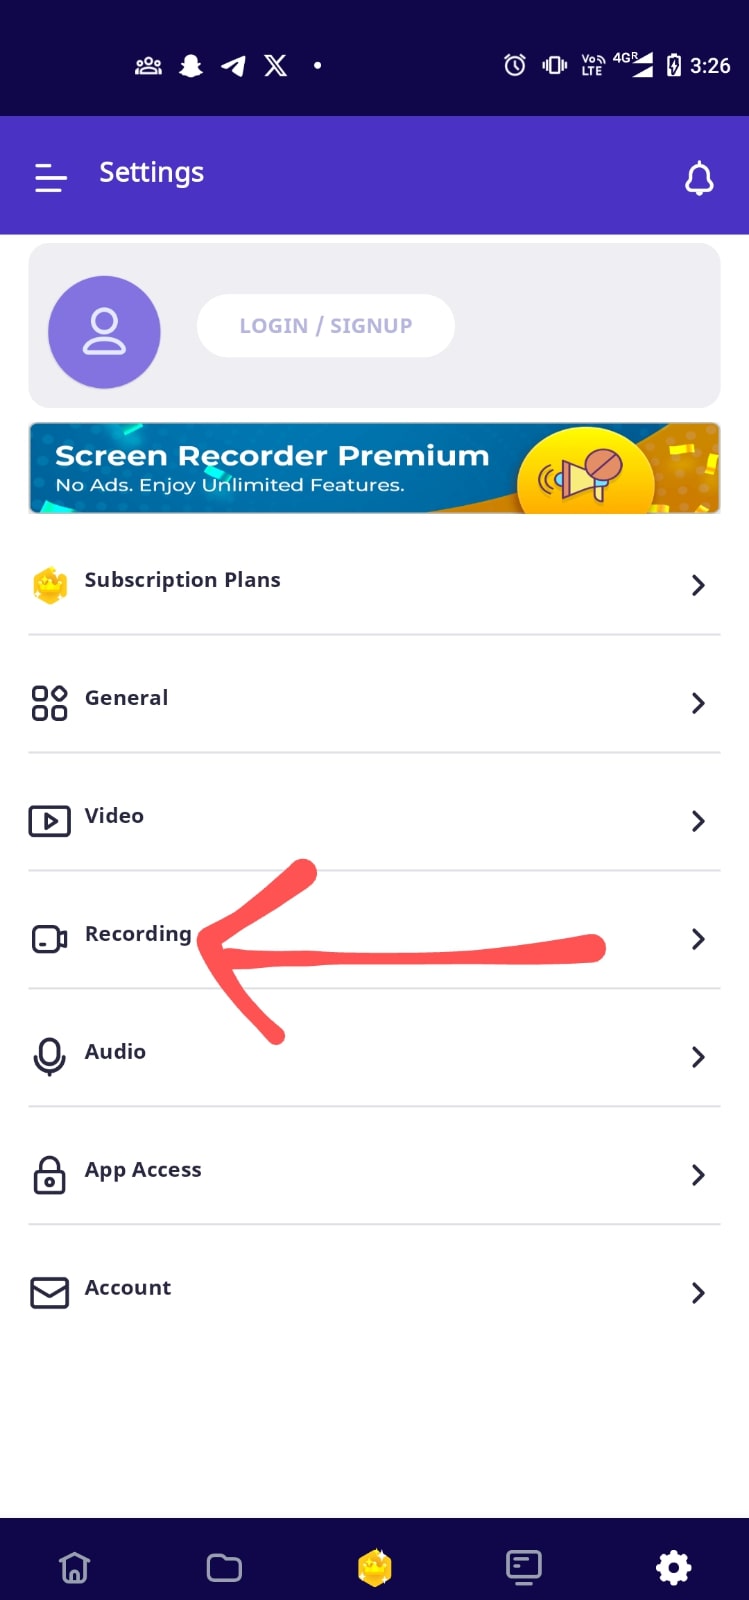 Click on the Recording option